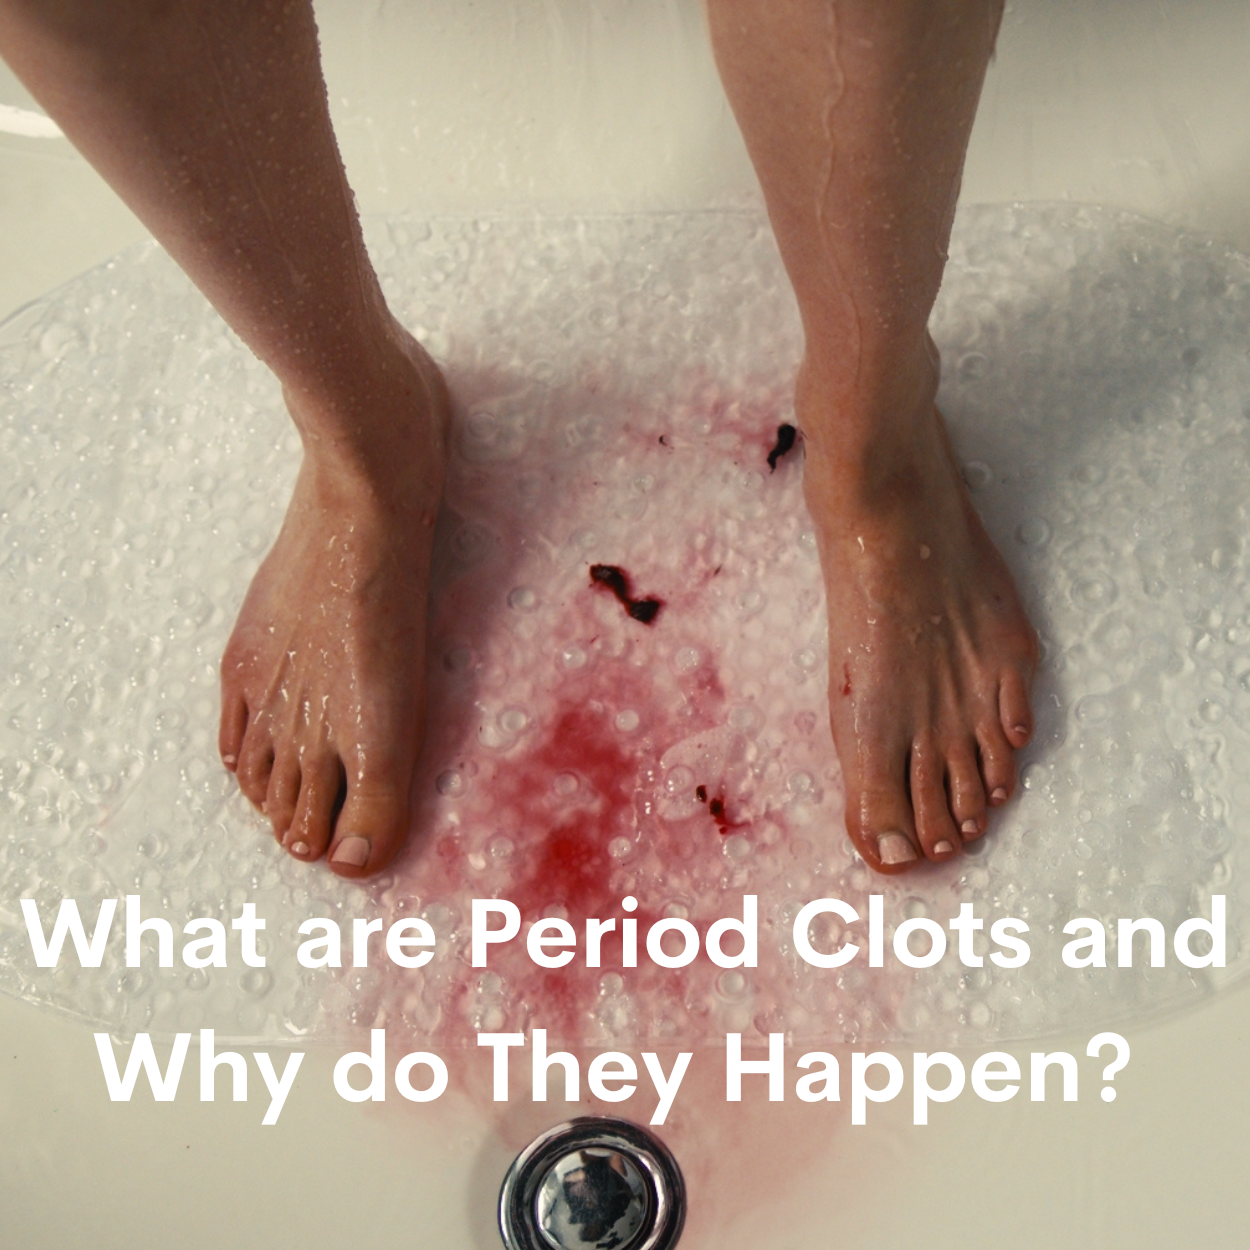 Stringy Blood Clots During Period? Should You Be Concerned?